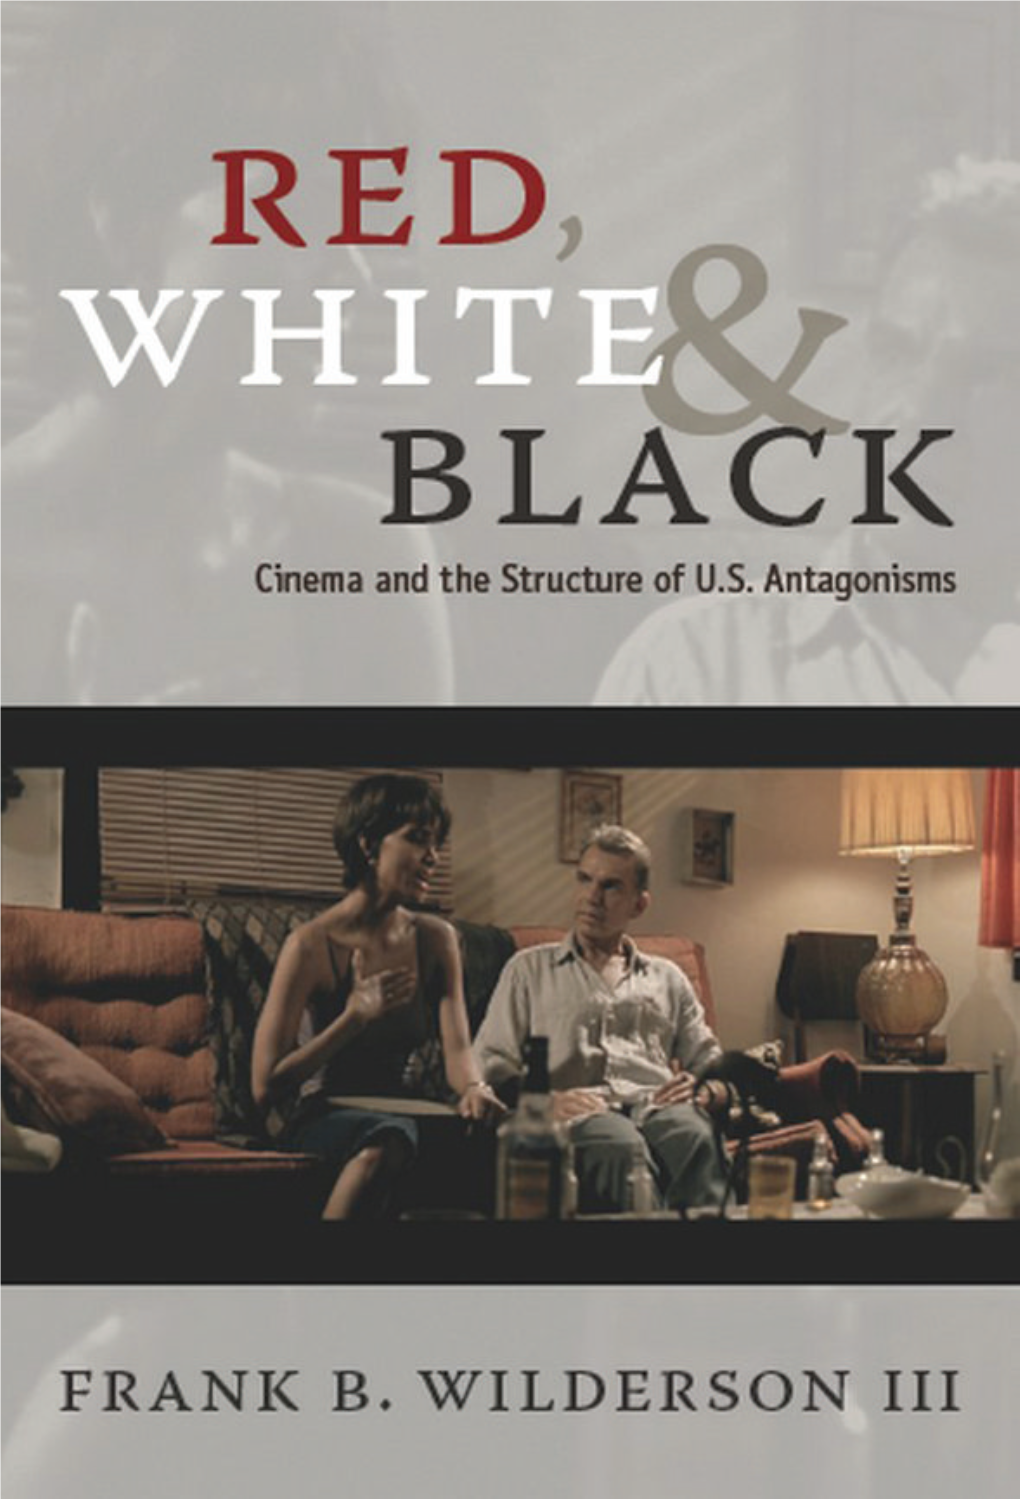 Wilderson-III-Red-White-Black-Cinema-And-The-Structure-Of-U.S.-Antagonisms.Pdf